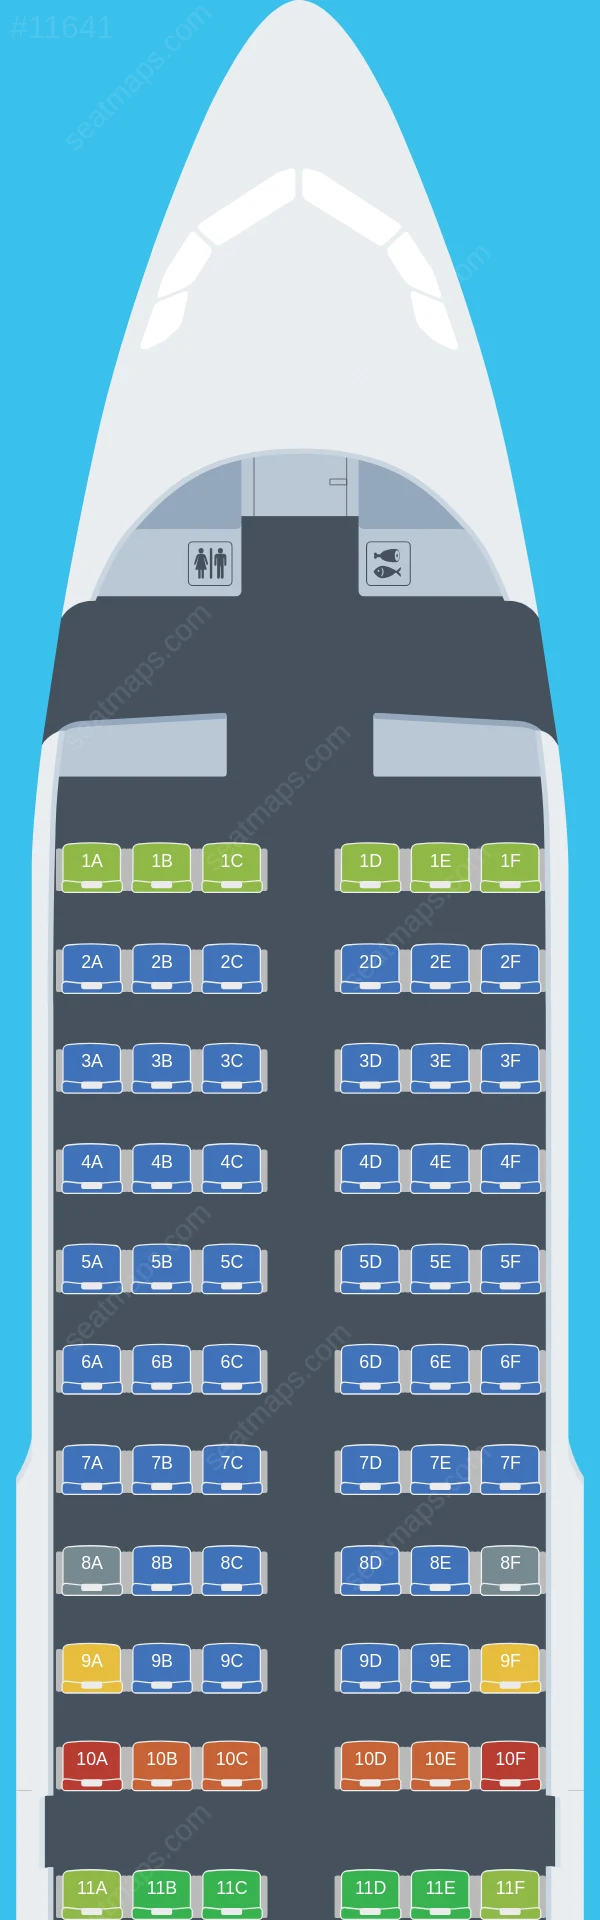 HiSky Europe Airbus A319-100 seatmap preview